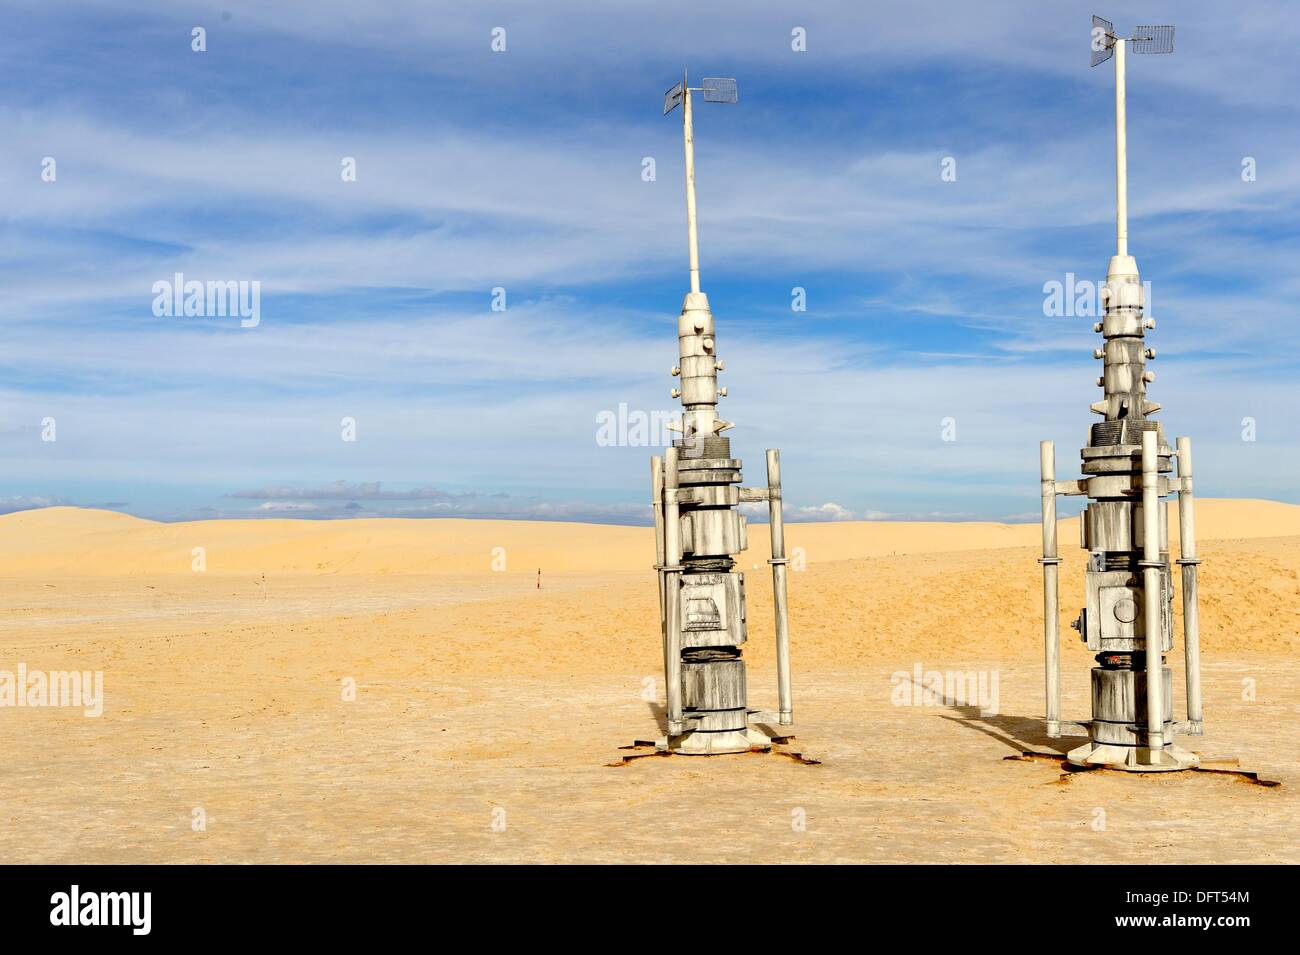 Filming locations for the George Lucas´s ´Star Wars´ movies, Chott el Djerid, Tunisia Stock Photo